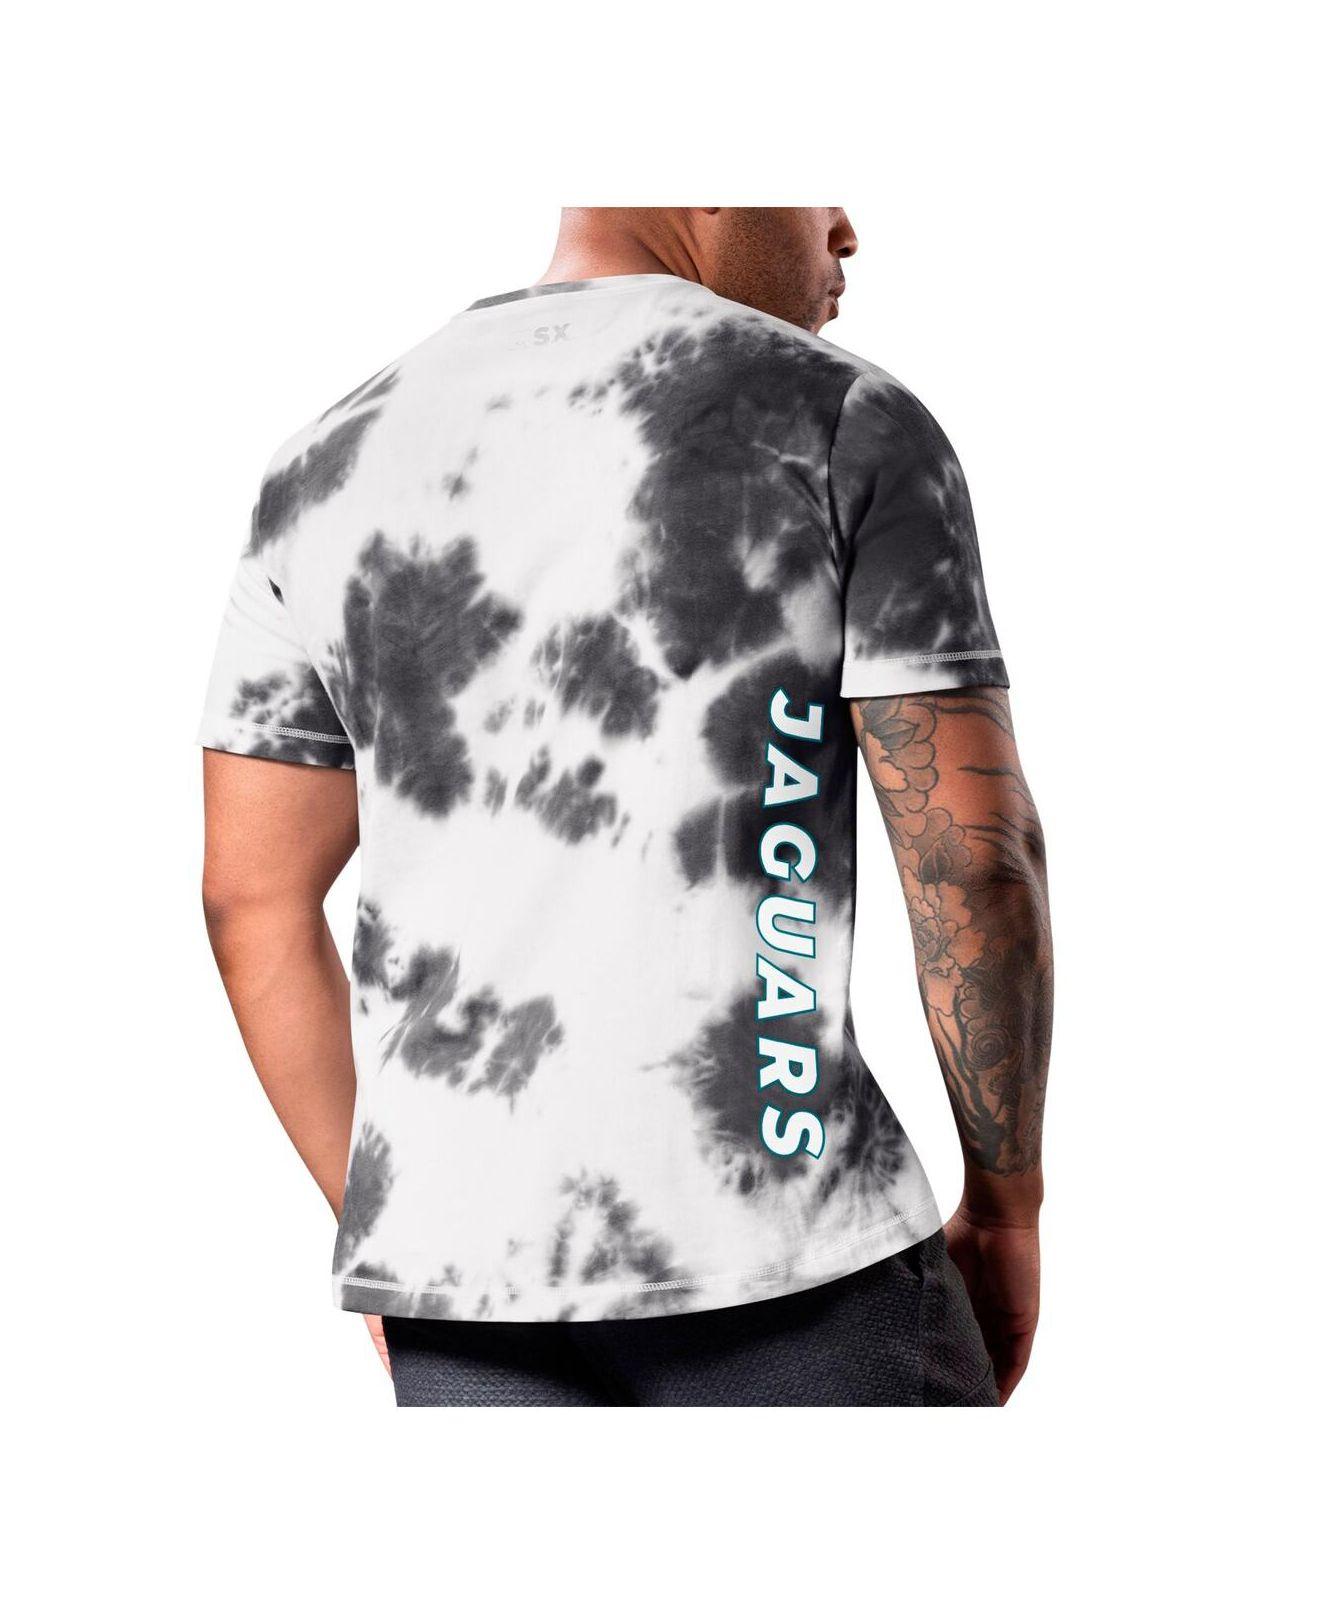 Miami Dolphins MSX by Michael Strahan Recovery Tie-Dye T-Shirt - Black